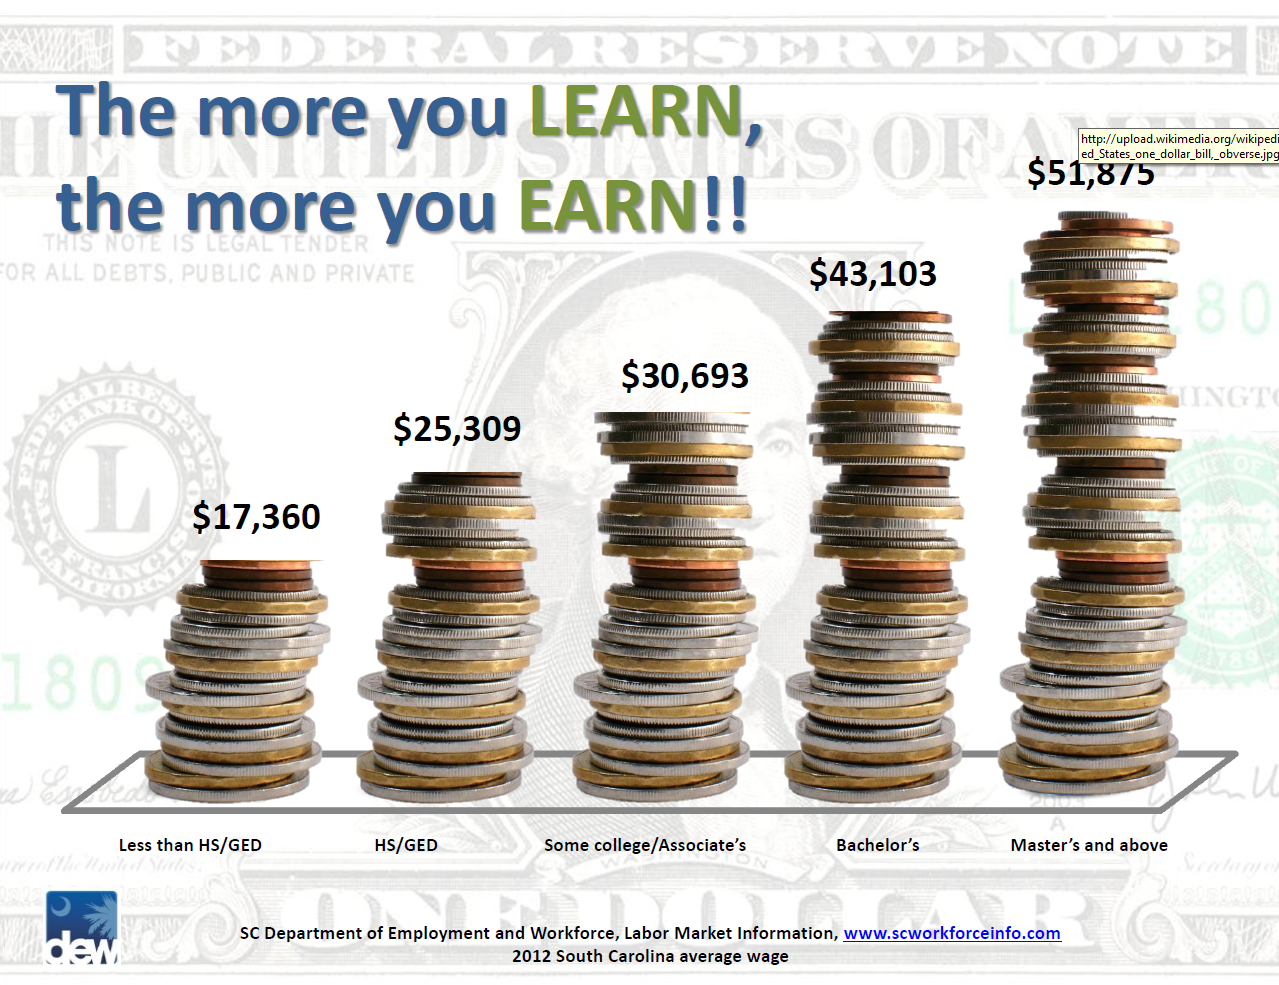 The more you Learn, the more you Earn